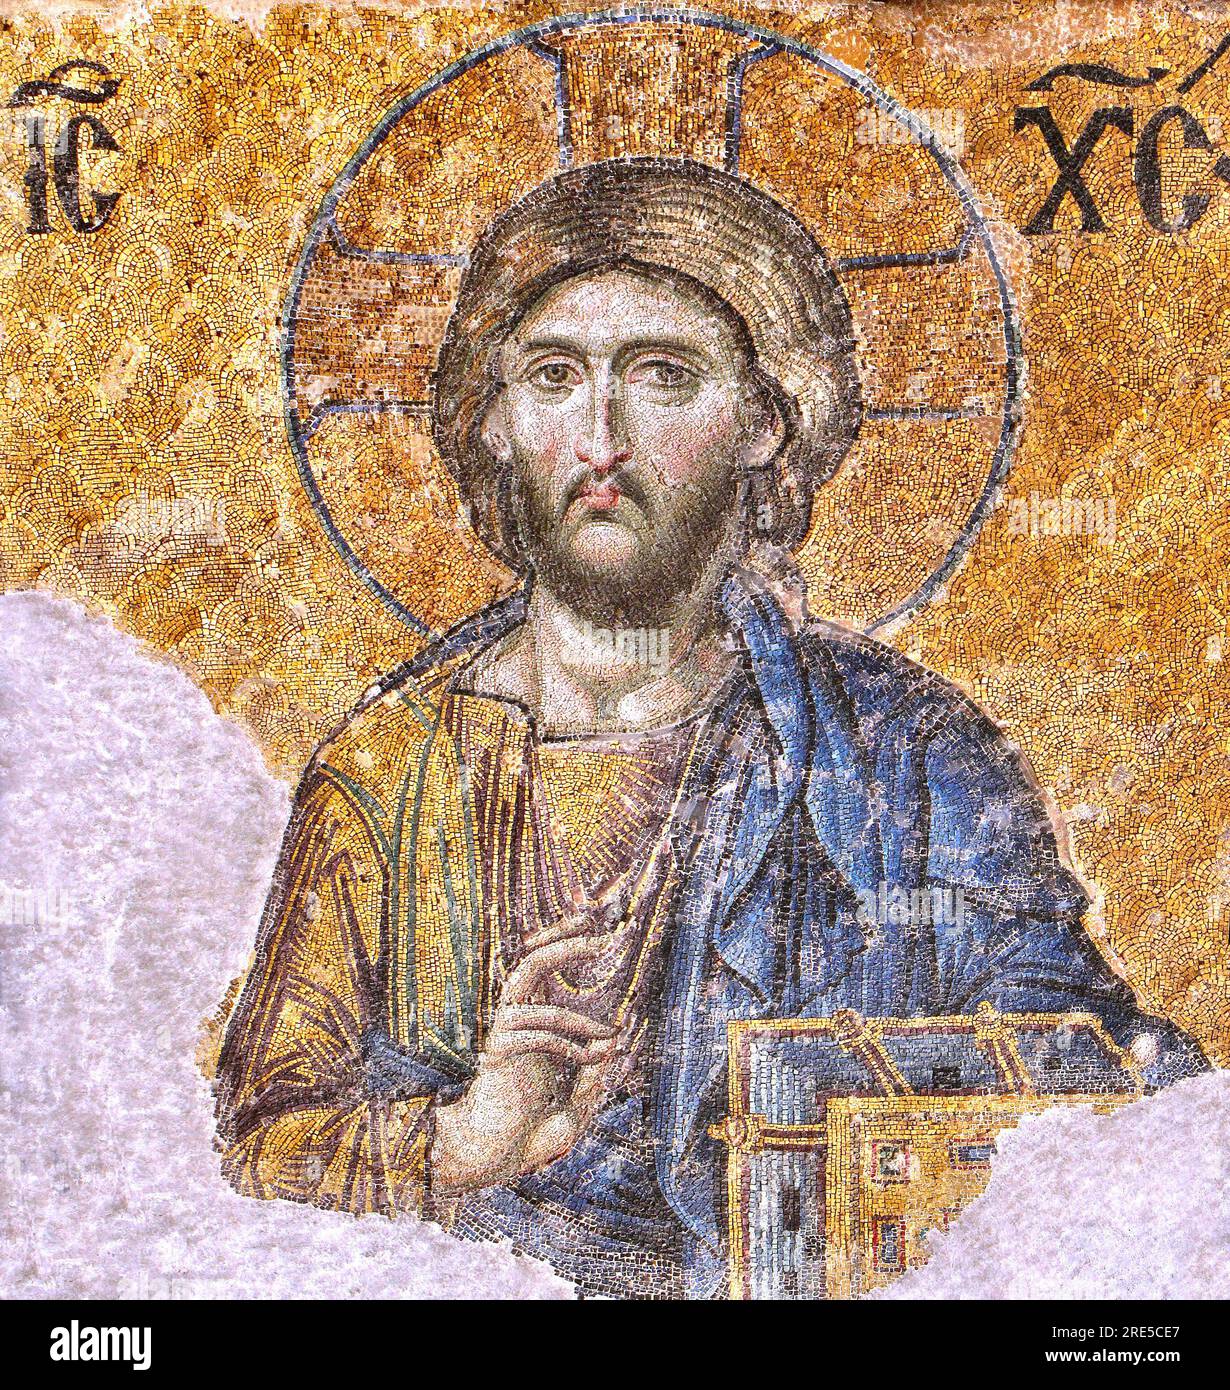 Title: Byzantine Mosaic Christ Pantocrator in Hagia Sophia Artist: Not specified (Byzantine craftsmen and artists) Date: 1261 (Most likely the period of the mosaic's creation after the restoration of Hagia Sophia) Dimensions: Not specified Medium: Mosaic (Tiles) Location: Hagia Sophia, Istanbul, Turkey Stock Photo